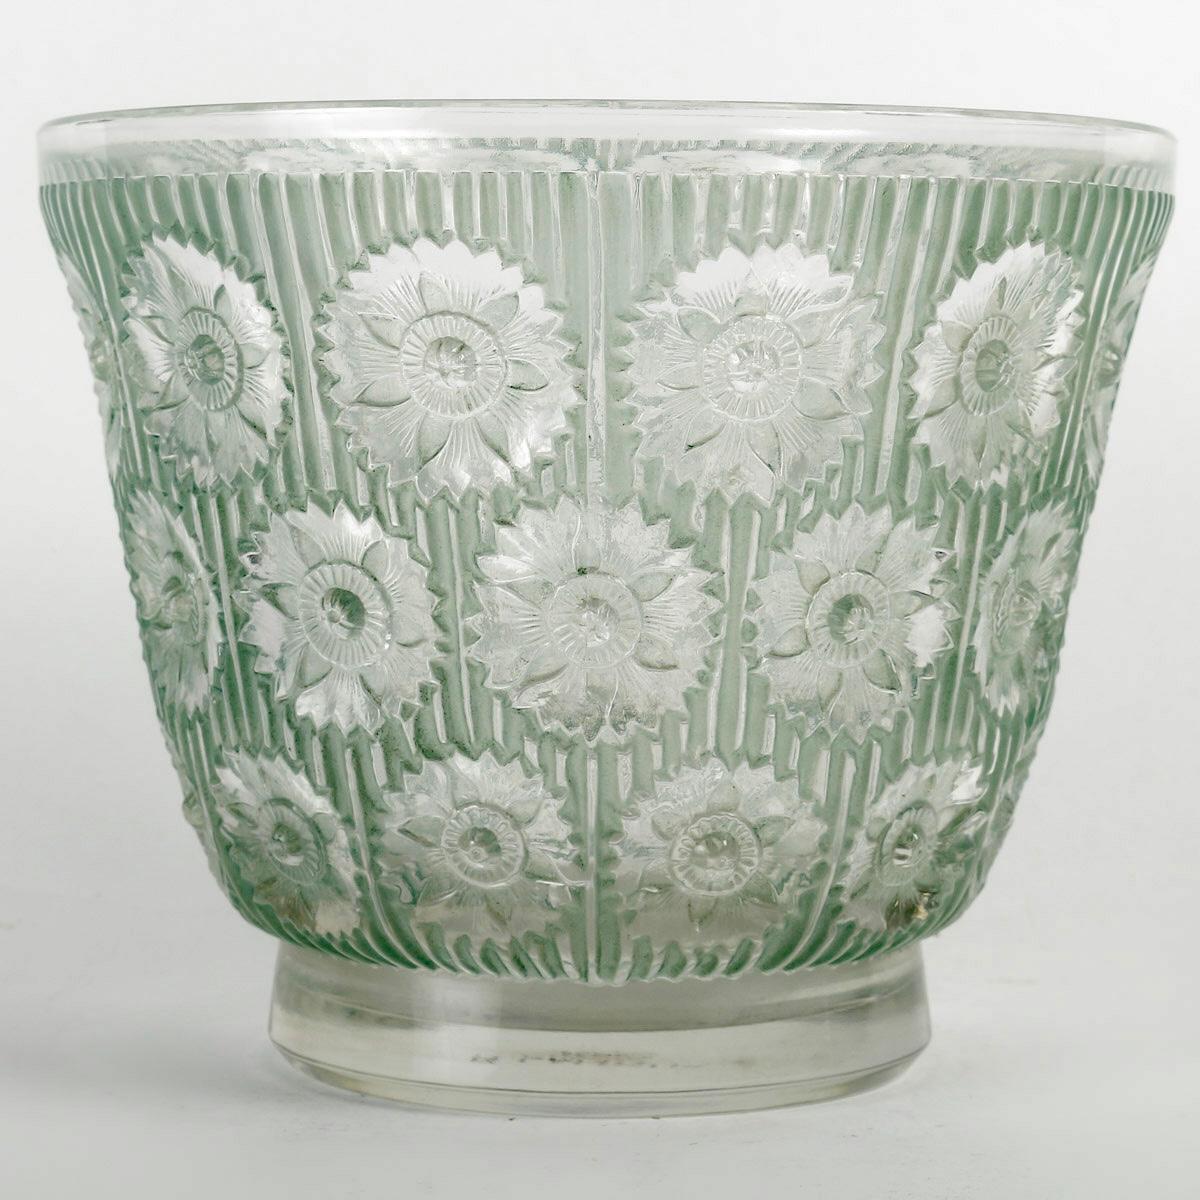 Art Deco 1937 René Lalique Vase Edelweiss Glass with Green Patina Flowers